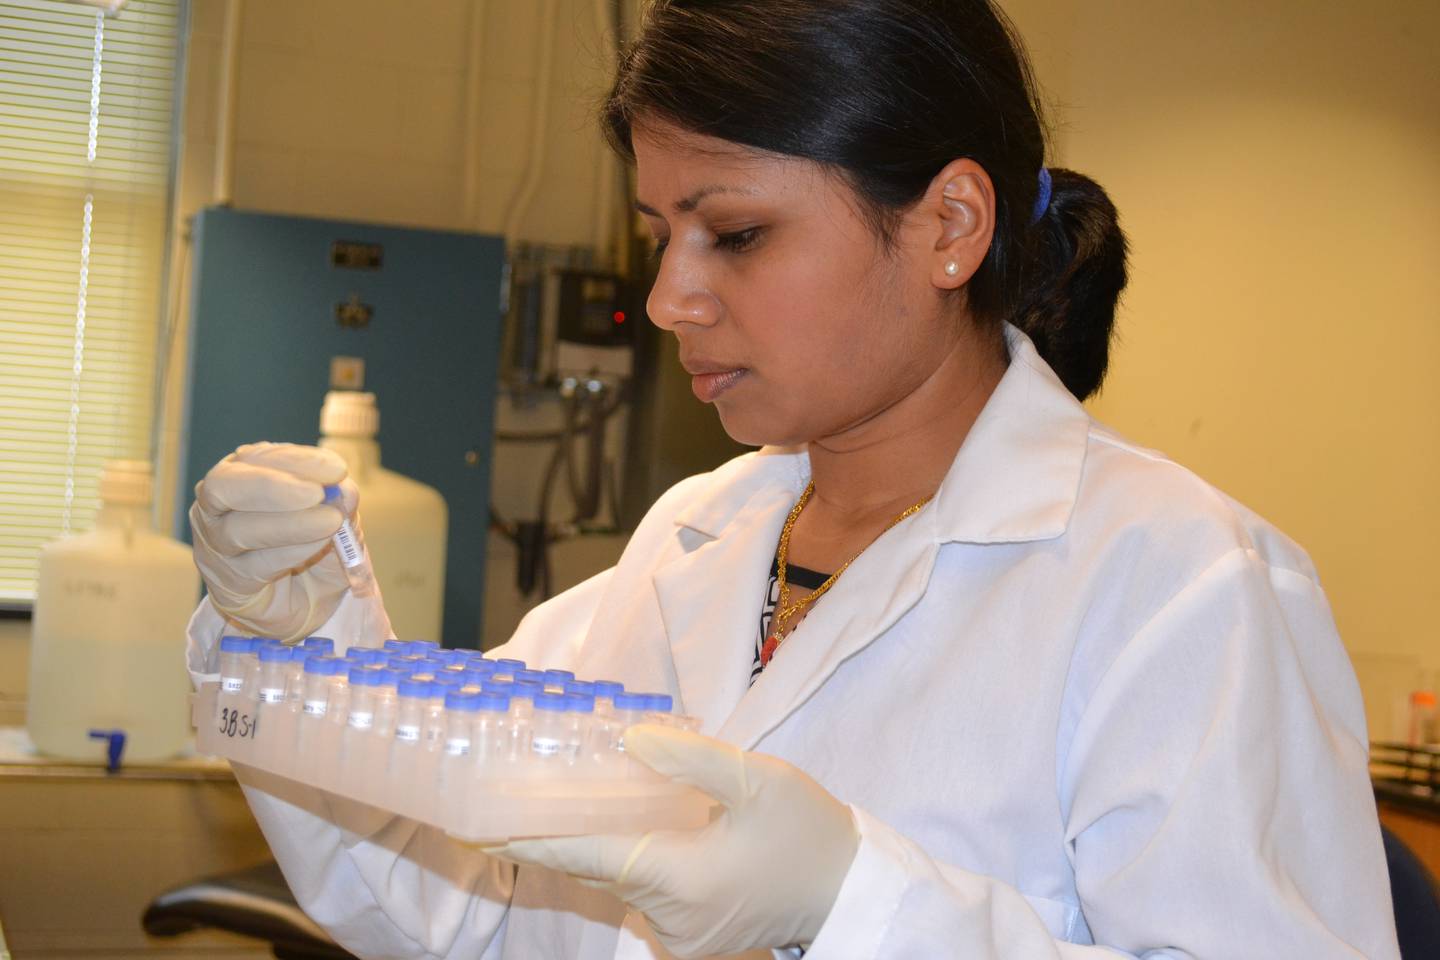 Rima Thapa, a Ph.D. candidate at Purdue University, holds molecular markers used to track genes in plants. As part of her research, Thapa determined the gene order for three disease-resistance genes on chromosome 3BS of wheat. Thapa’s research was funded by a grant from the Agriculture and Food Research Initiative. Job opportunities for research and development in agriculture can be found at Purdue University, companies like Beck’s Hybrids and many other facilities.